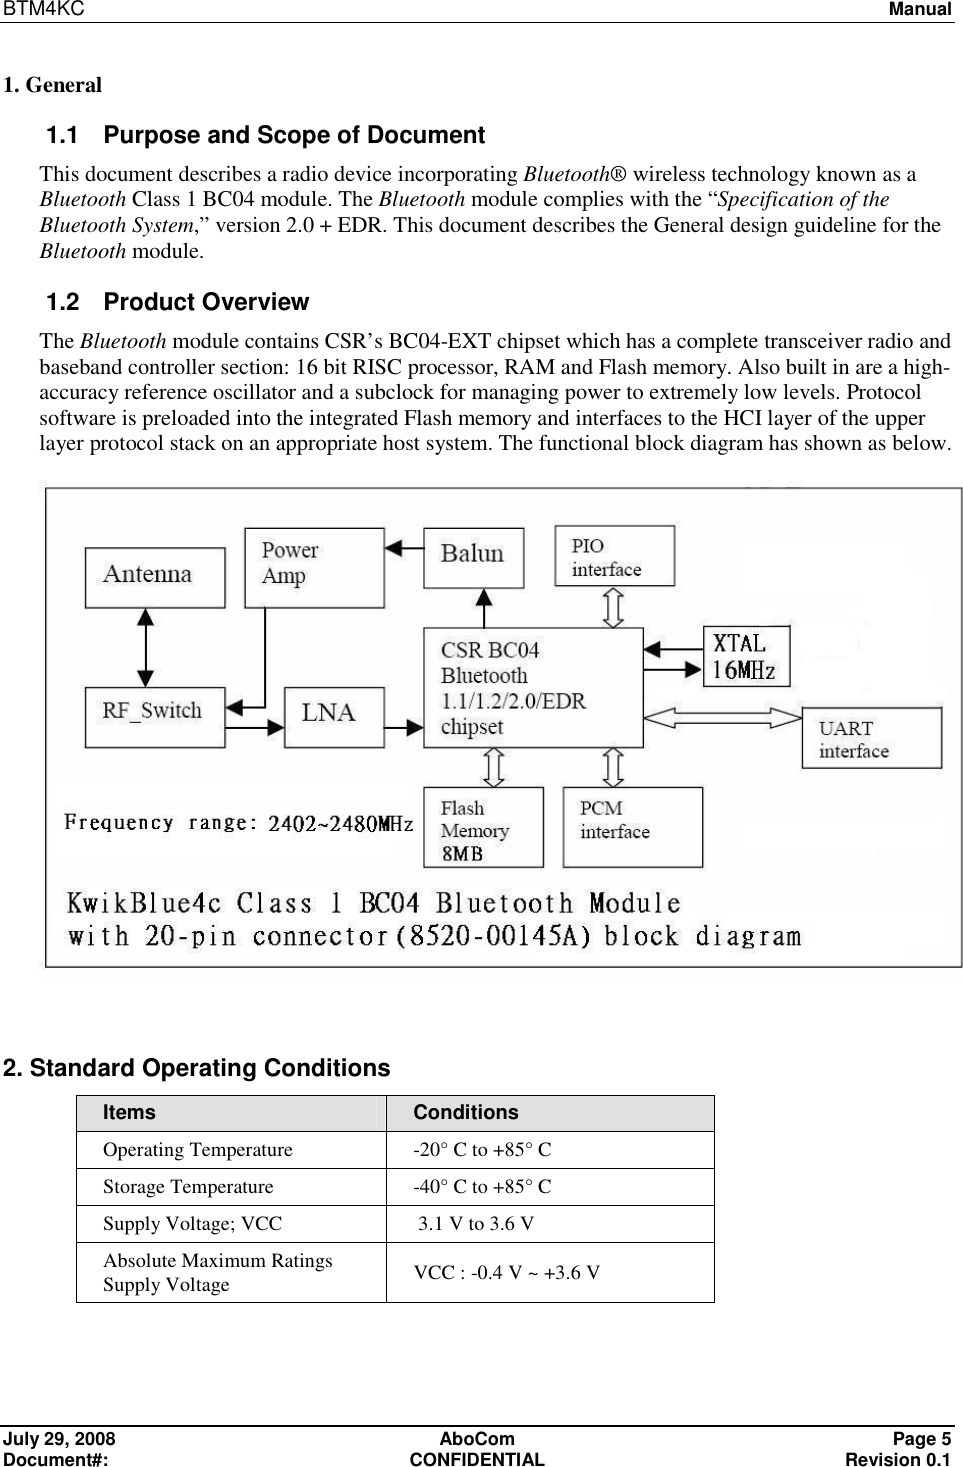 BTM4KC   Manual  July 29, 2008  AboCom  Page 5 Document#:  CONFIDENTIAL  Revision 0.1 1. General 1.1  Purpose and Scope of Document This document describes a radio device incorporating Bluetooth® wireless technology known as a Bluetooth Class 1 BC04 module. The Bluetooth module complies with the “Specification of the Bluetooth System,” version 2.0 + EDR. This document describes the General design guideline for the Bluetooth module. 1.2  Product Overview The Bluetooth module contains CSR’s BC04-EXT chipset which has a complete transceiver radio and baseband controller section: 16 bit RISC processor, RAM and Flash memory. Also built in are a high- accuracy reference oscillator and a subclock for managing power to extremely low levels. Protocol software is preloaded into the integrated Flash memory and interfaces to the HCI layer of the upper layer protocol stack on an appropriate host system. The functional block diagram has shown as below.   2. Standard Operating Conditions Items  Conditions Operating Temperature  -20° C to +85° C Storage Temperature  -40° C to +85° C Supply Voltage; VCC   3.1 V to 3.6 V Absolute Maximum Ratings Supply Voltage  VCC : -0.4 V ~ +3.6 V 